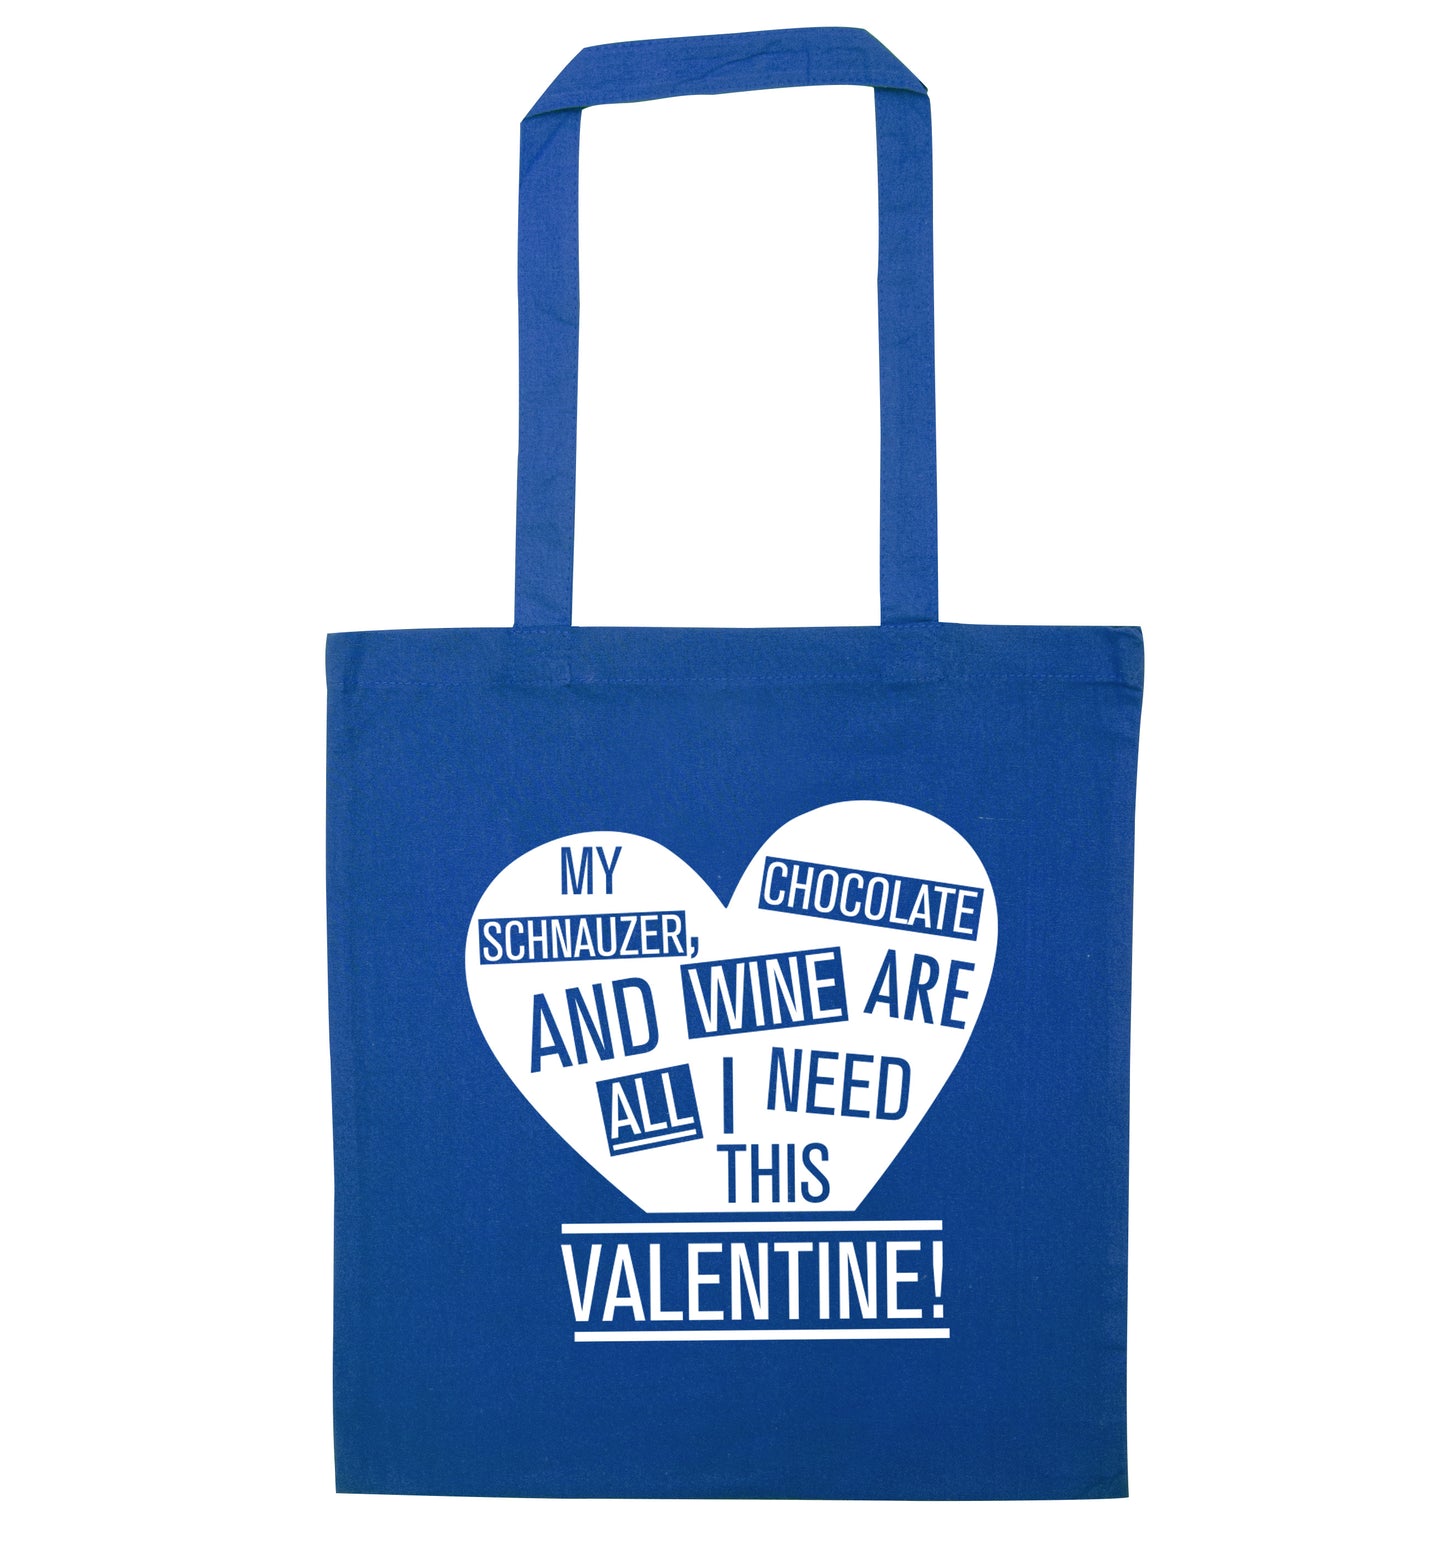 My schnauzer, chocolate and wine are all I need this valentine! blue tote bag